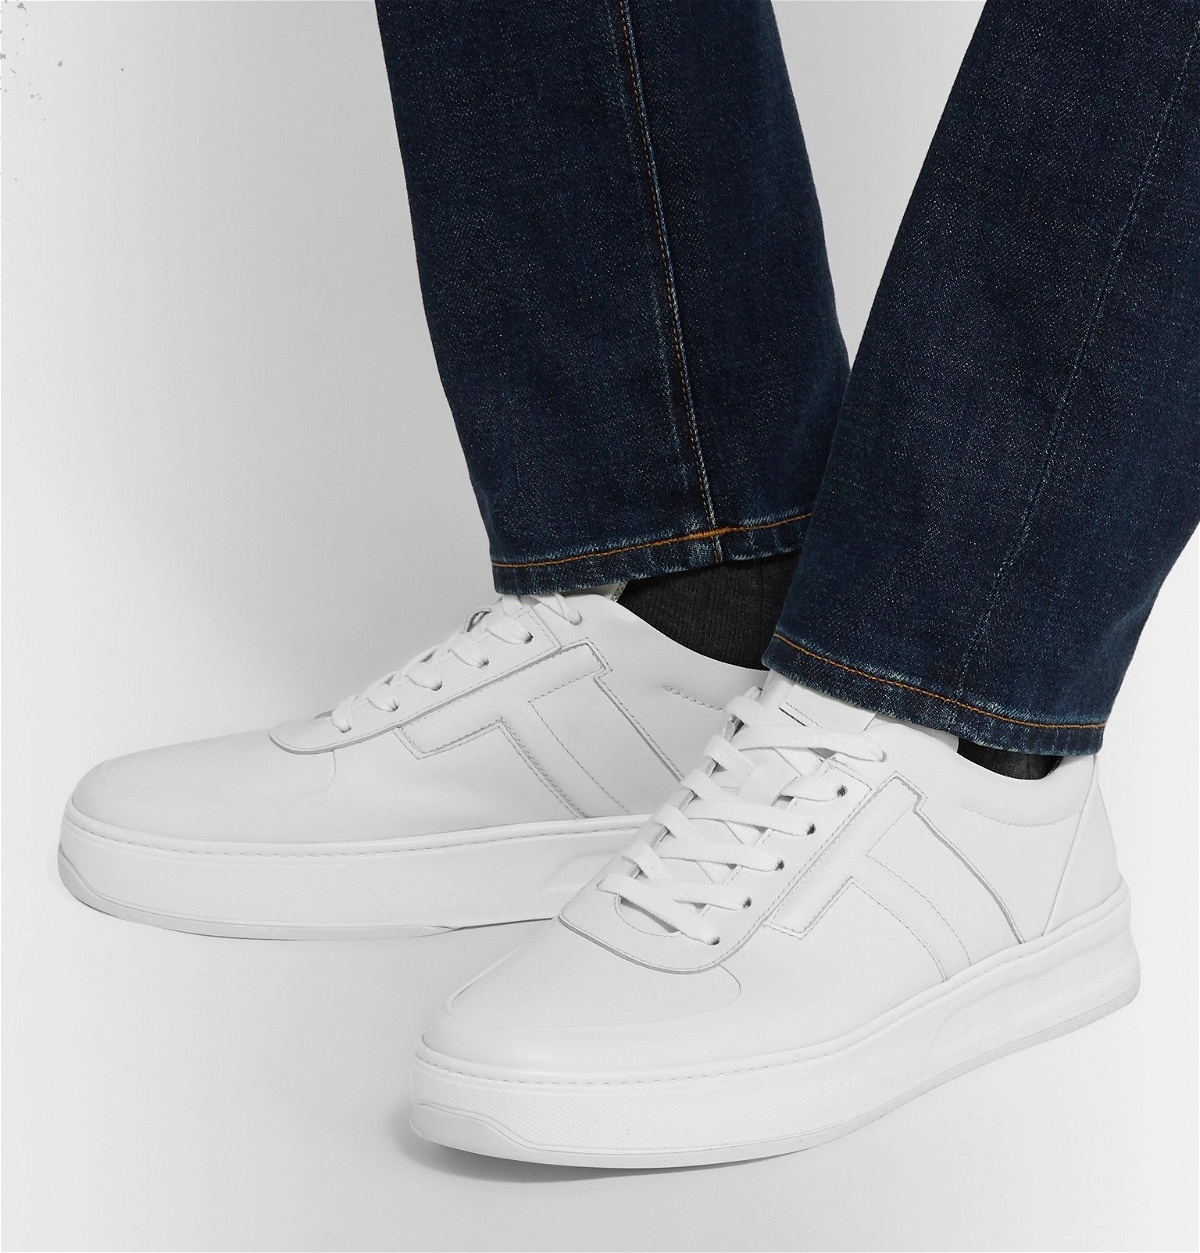 Tod's - Cassetta Leather Sneakers - White Tod's